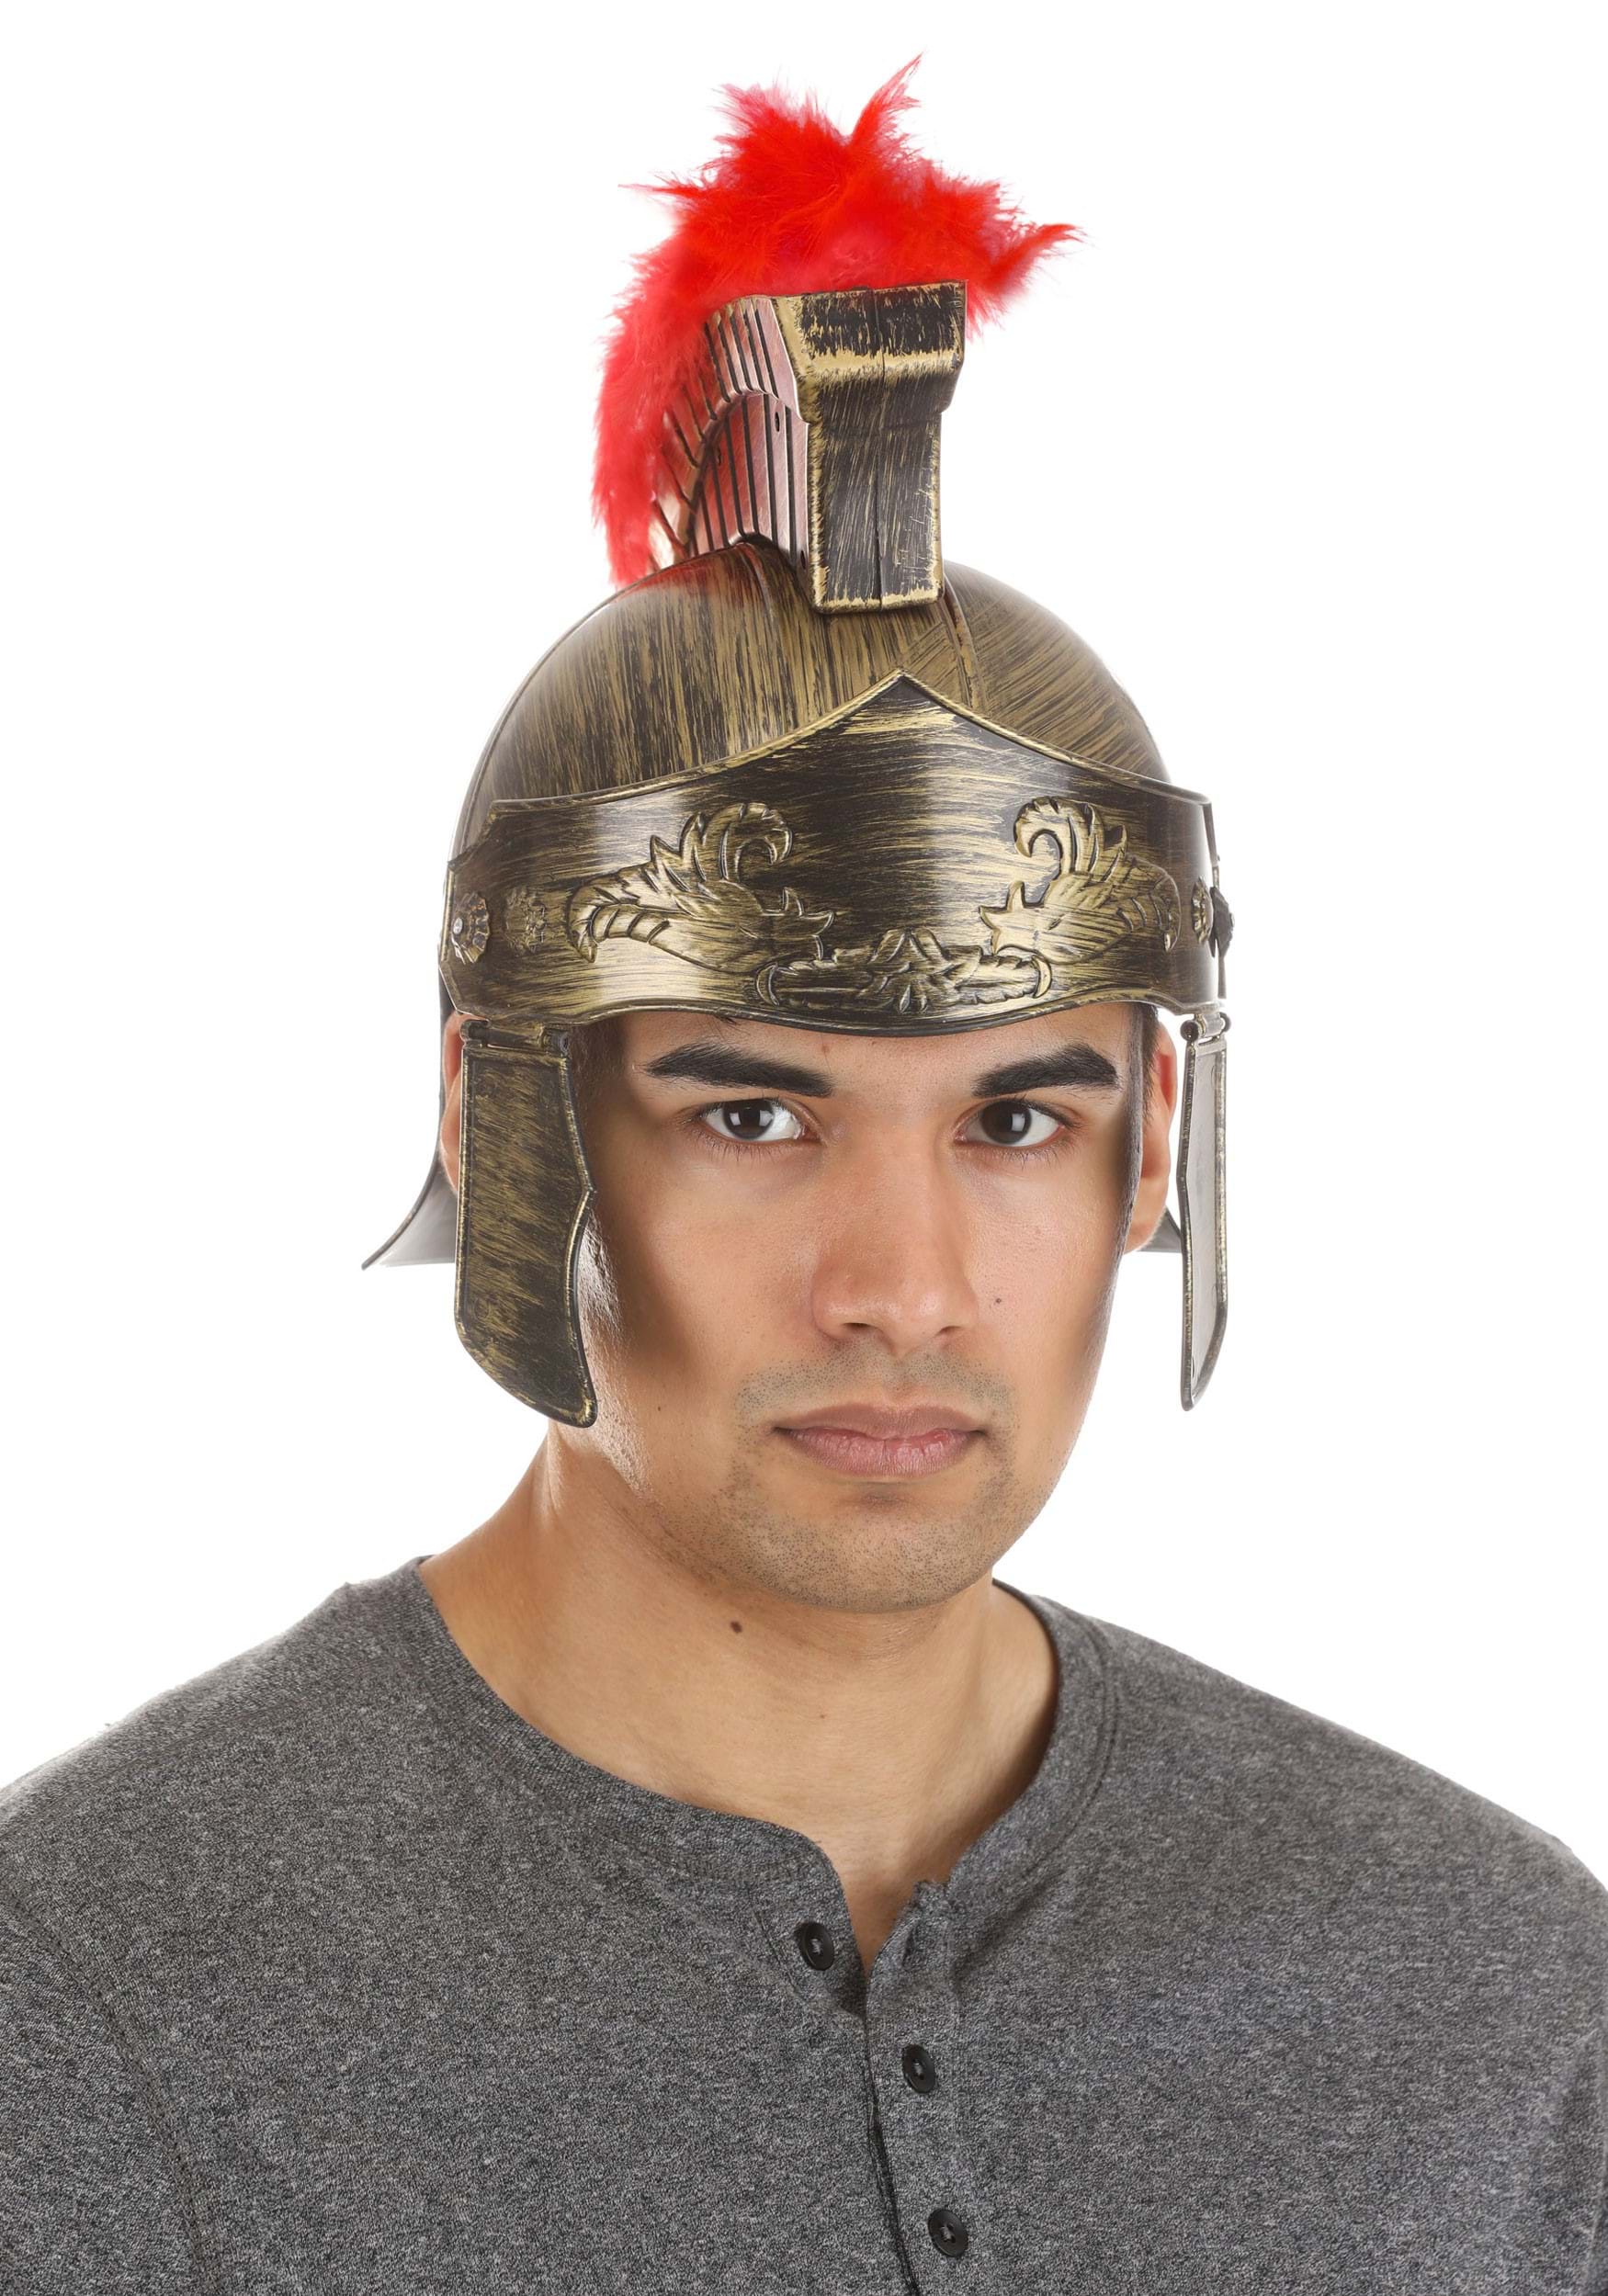 Gladiator Red Feather Fancy Dress Costume Helmet For Adults